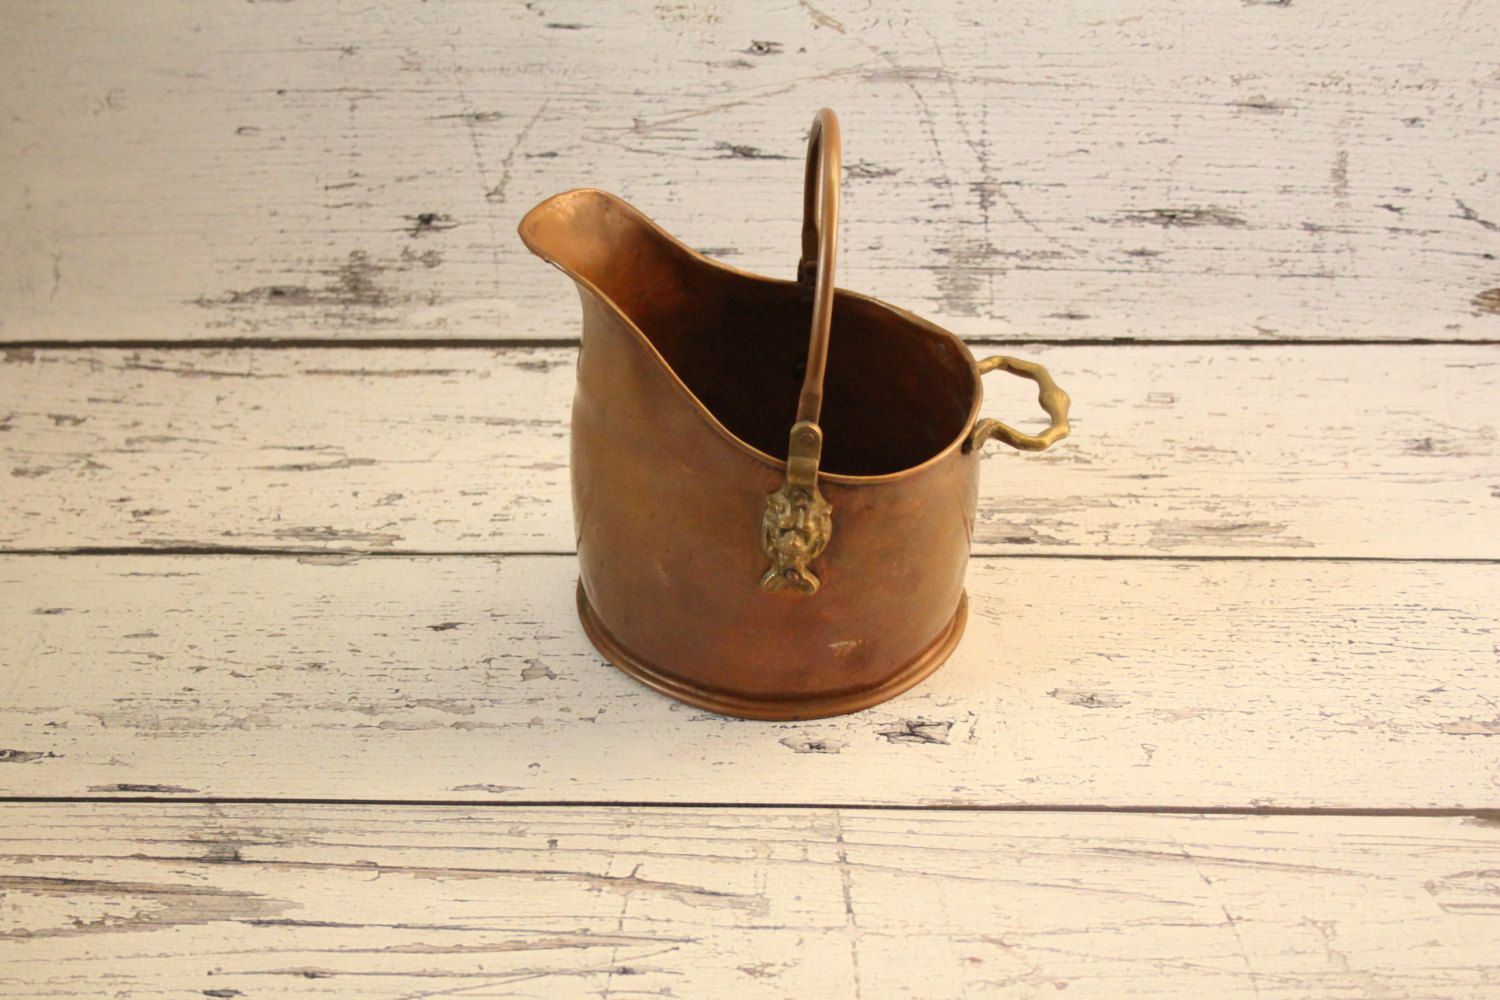 Fireplace Bucket Awesome Vintage solid Copper Fireplace Coal Bucket Scuttle Holder